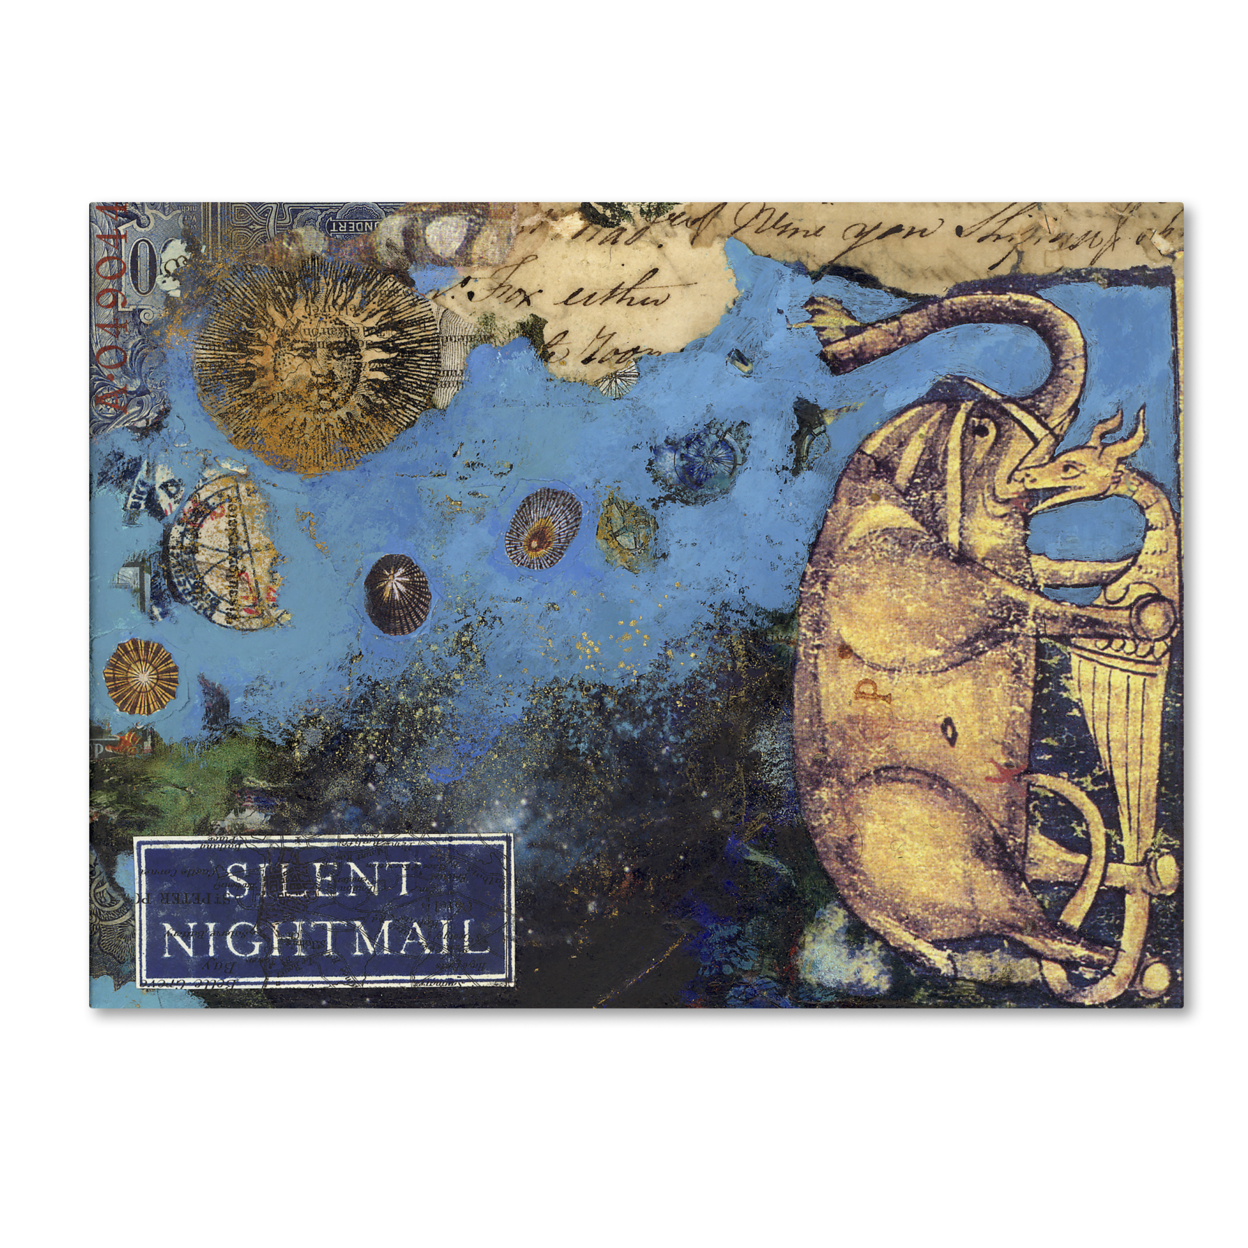 Nick Bantock 'Silent Nightmail' Canvas Wall Art 35 X 47 Inches